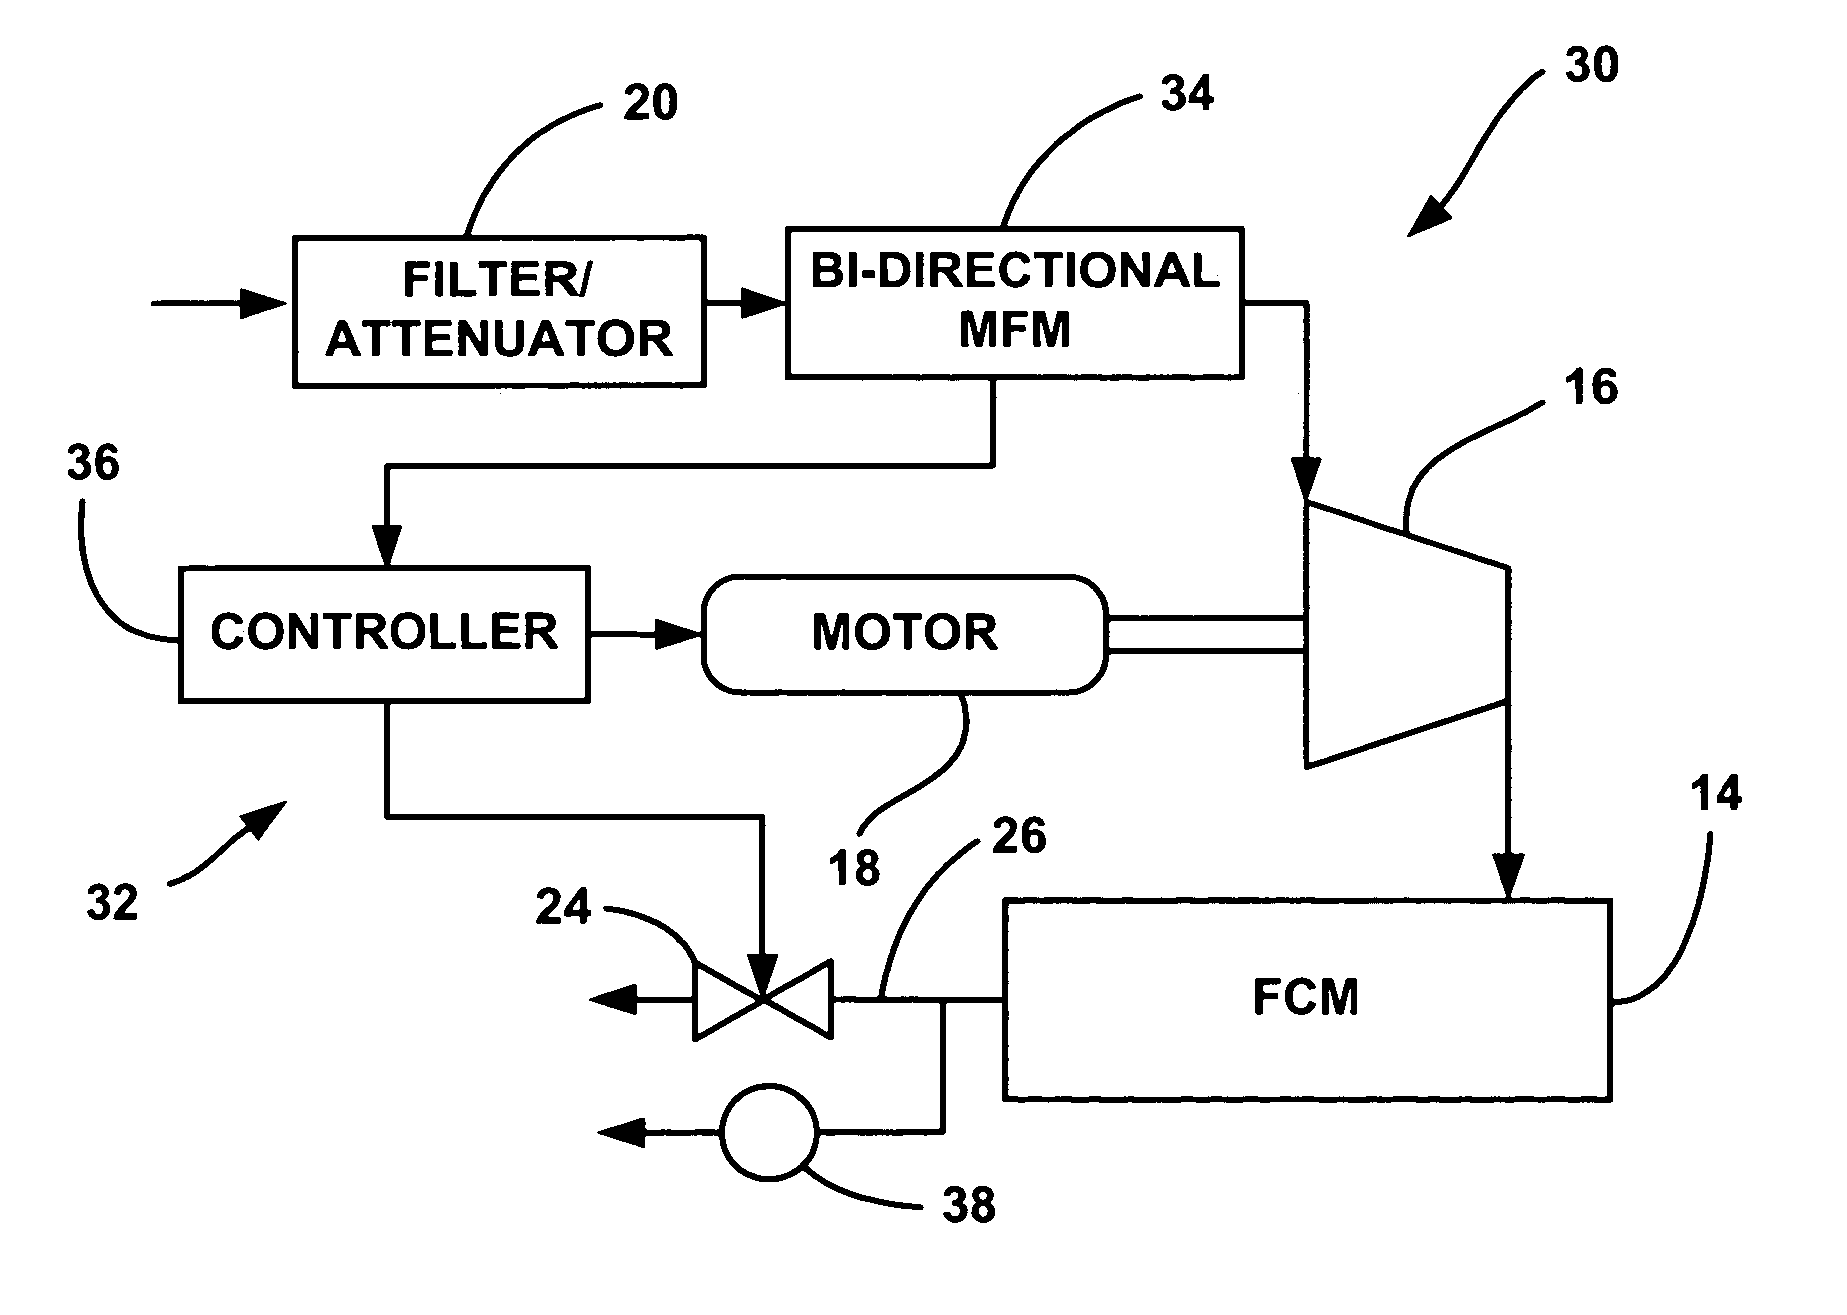 Centrifugal compressor surge detection using a bi-directional MFM in a fuel cell system